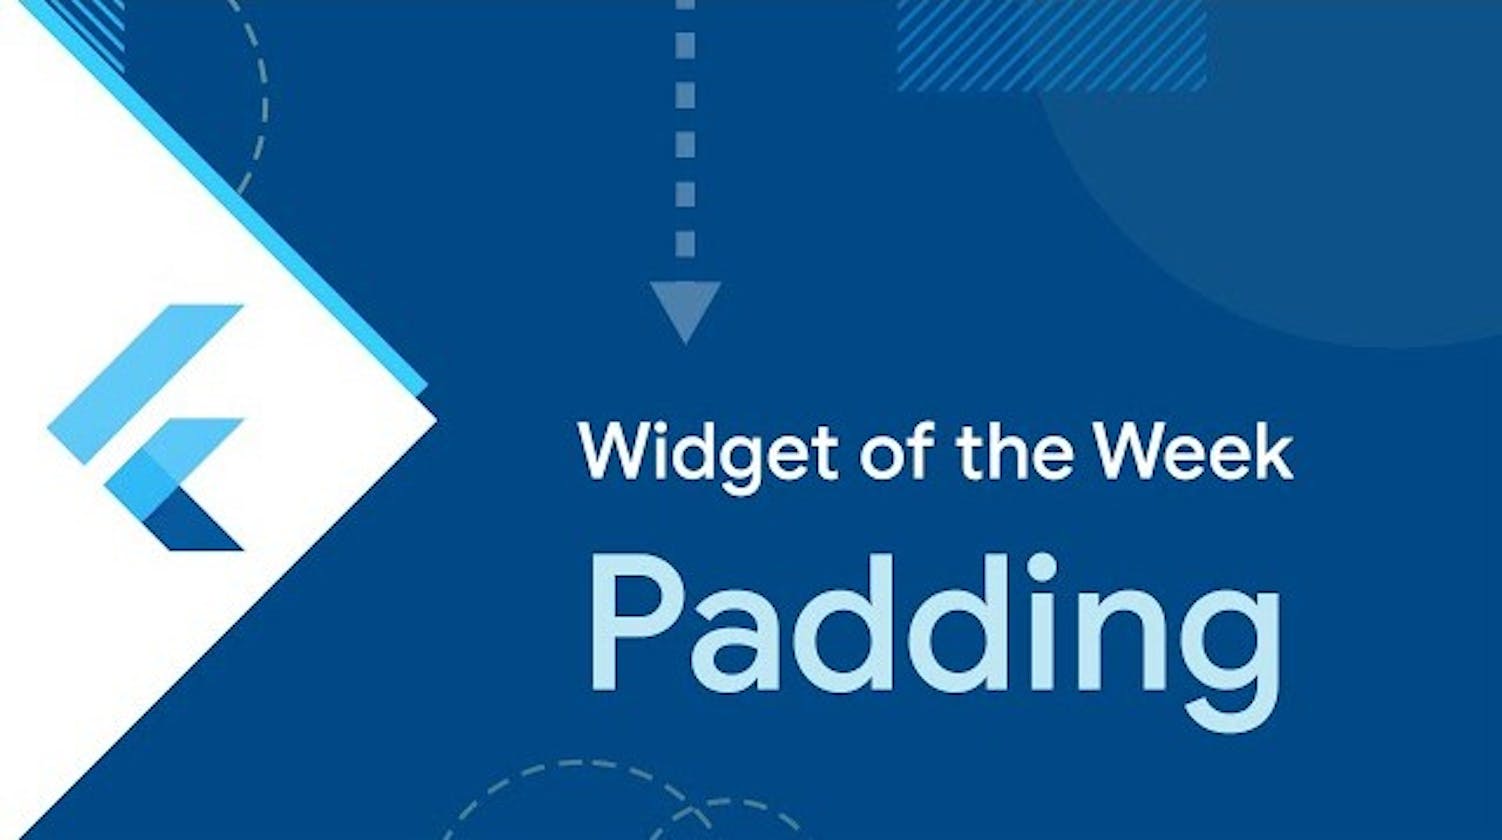 Custom Padding Widgets using Flutter for Clearly Designed and Useful Layouts for Big Projects